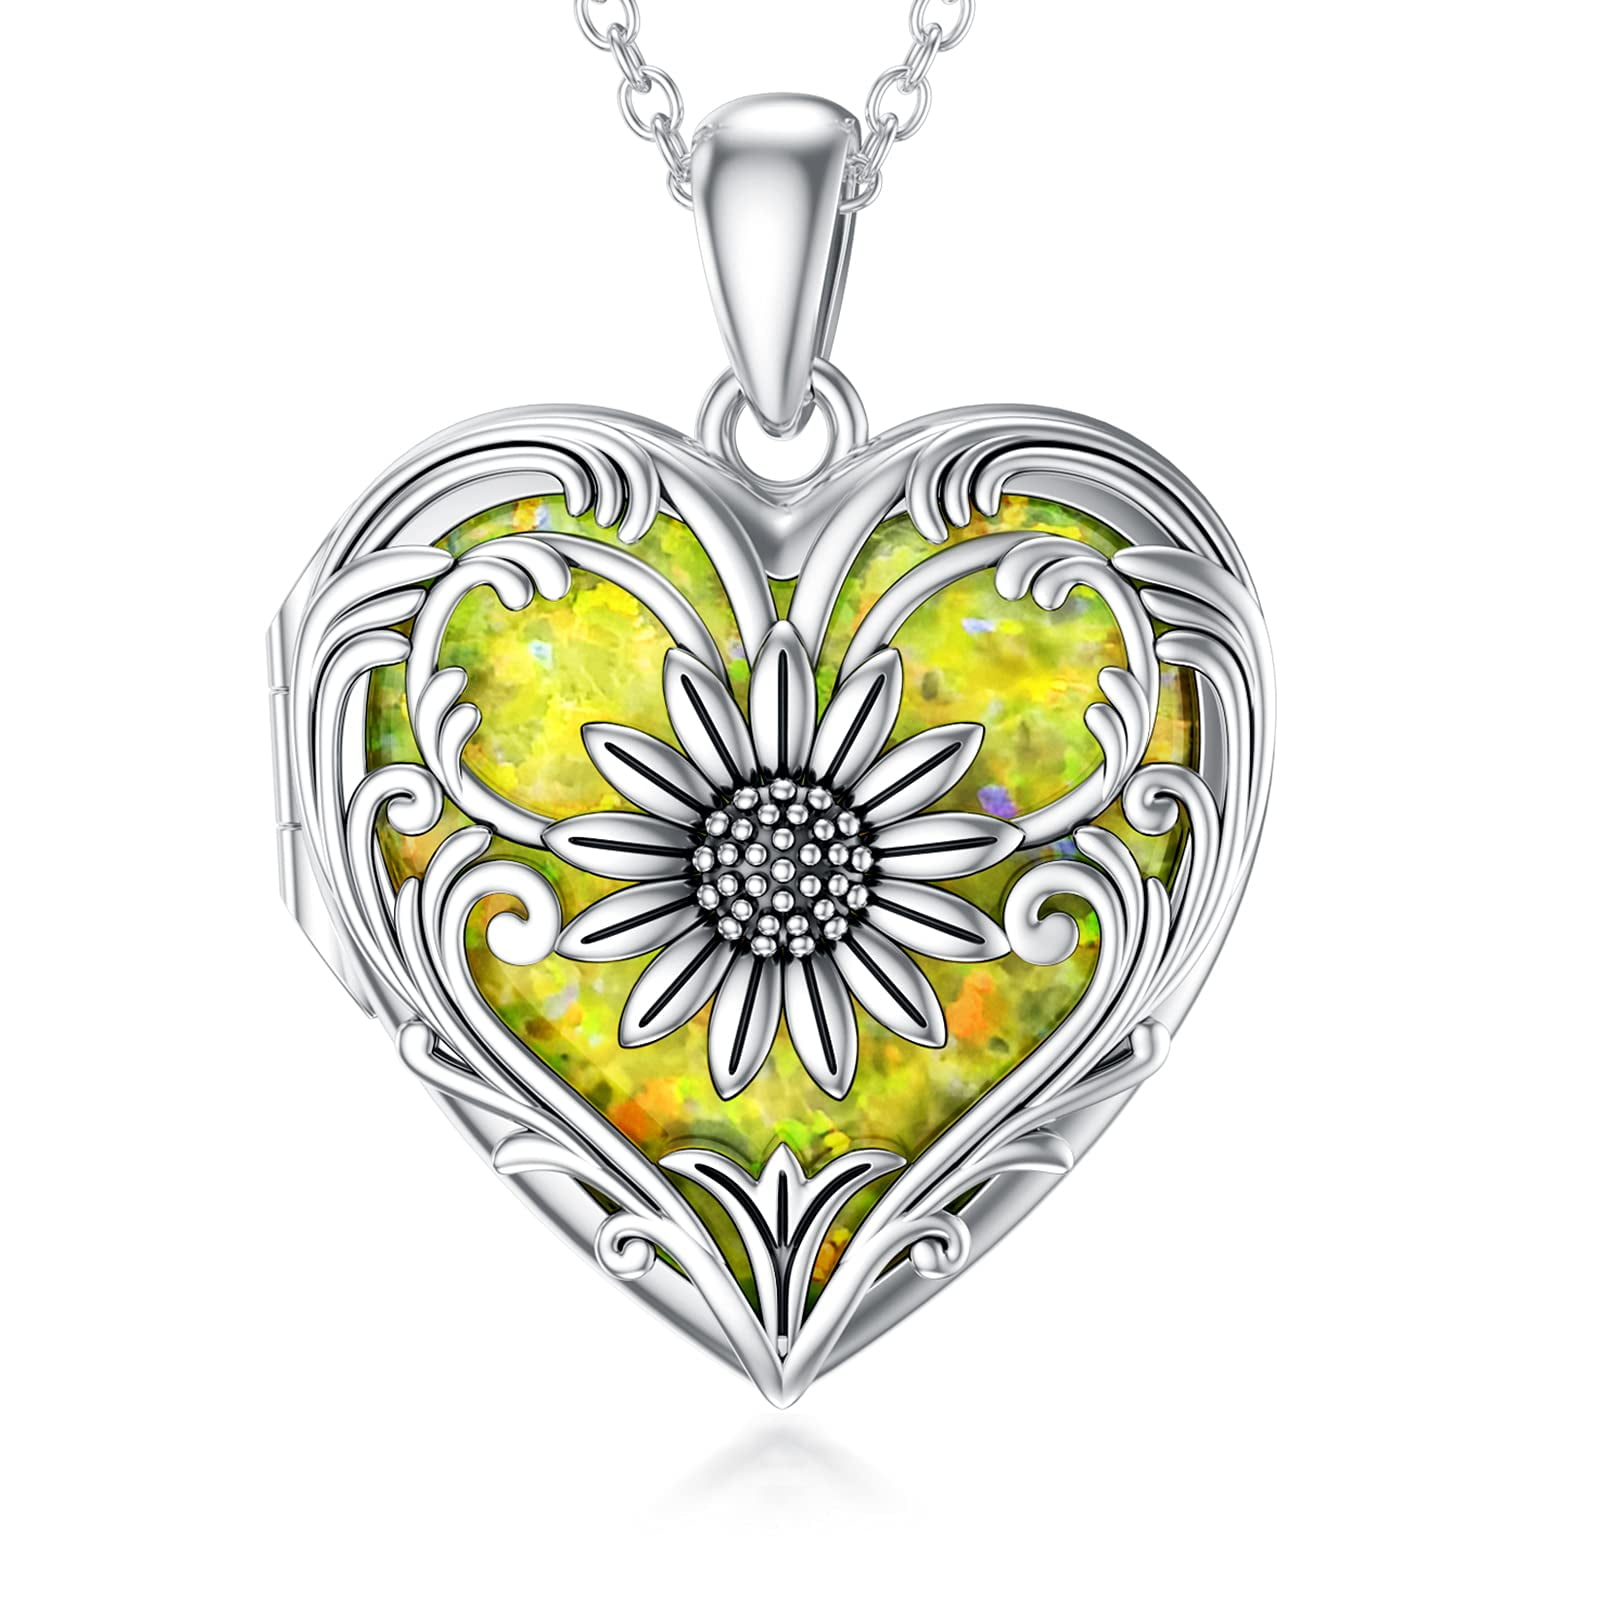 Sunflower Heart Locket Necklace That Holds Pictures Gold Picture Locket Necklace Girls Sunflower Heart Locket Necklace That Holds Pictures for Mother Daughter